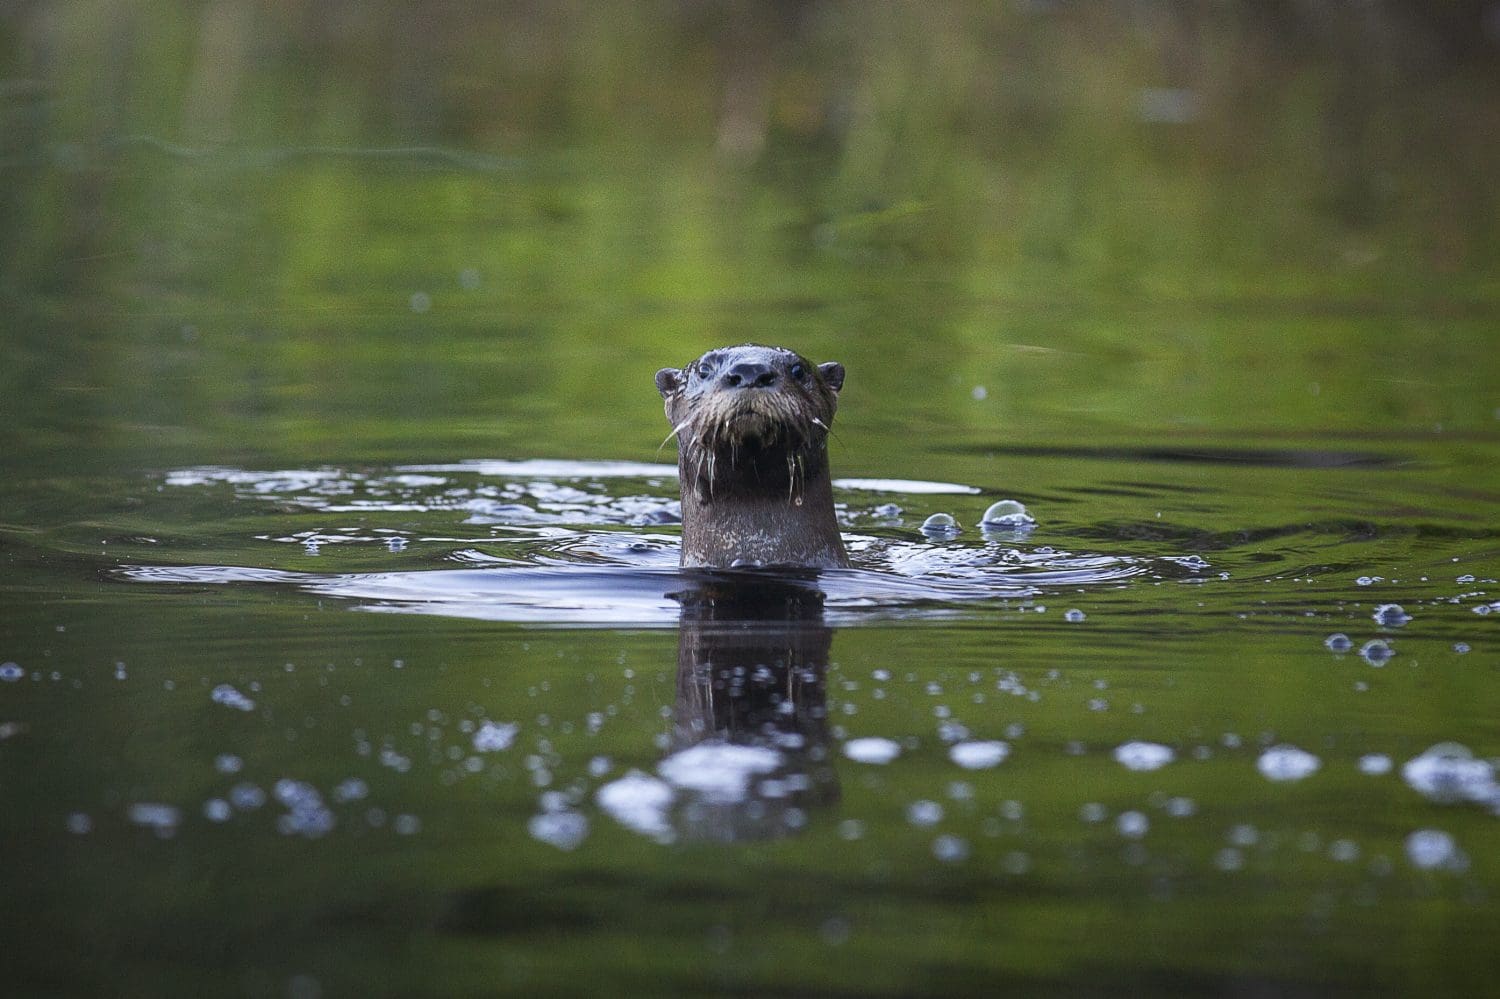 Curious River Otter